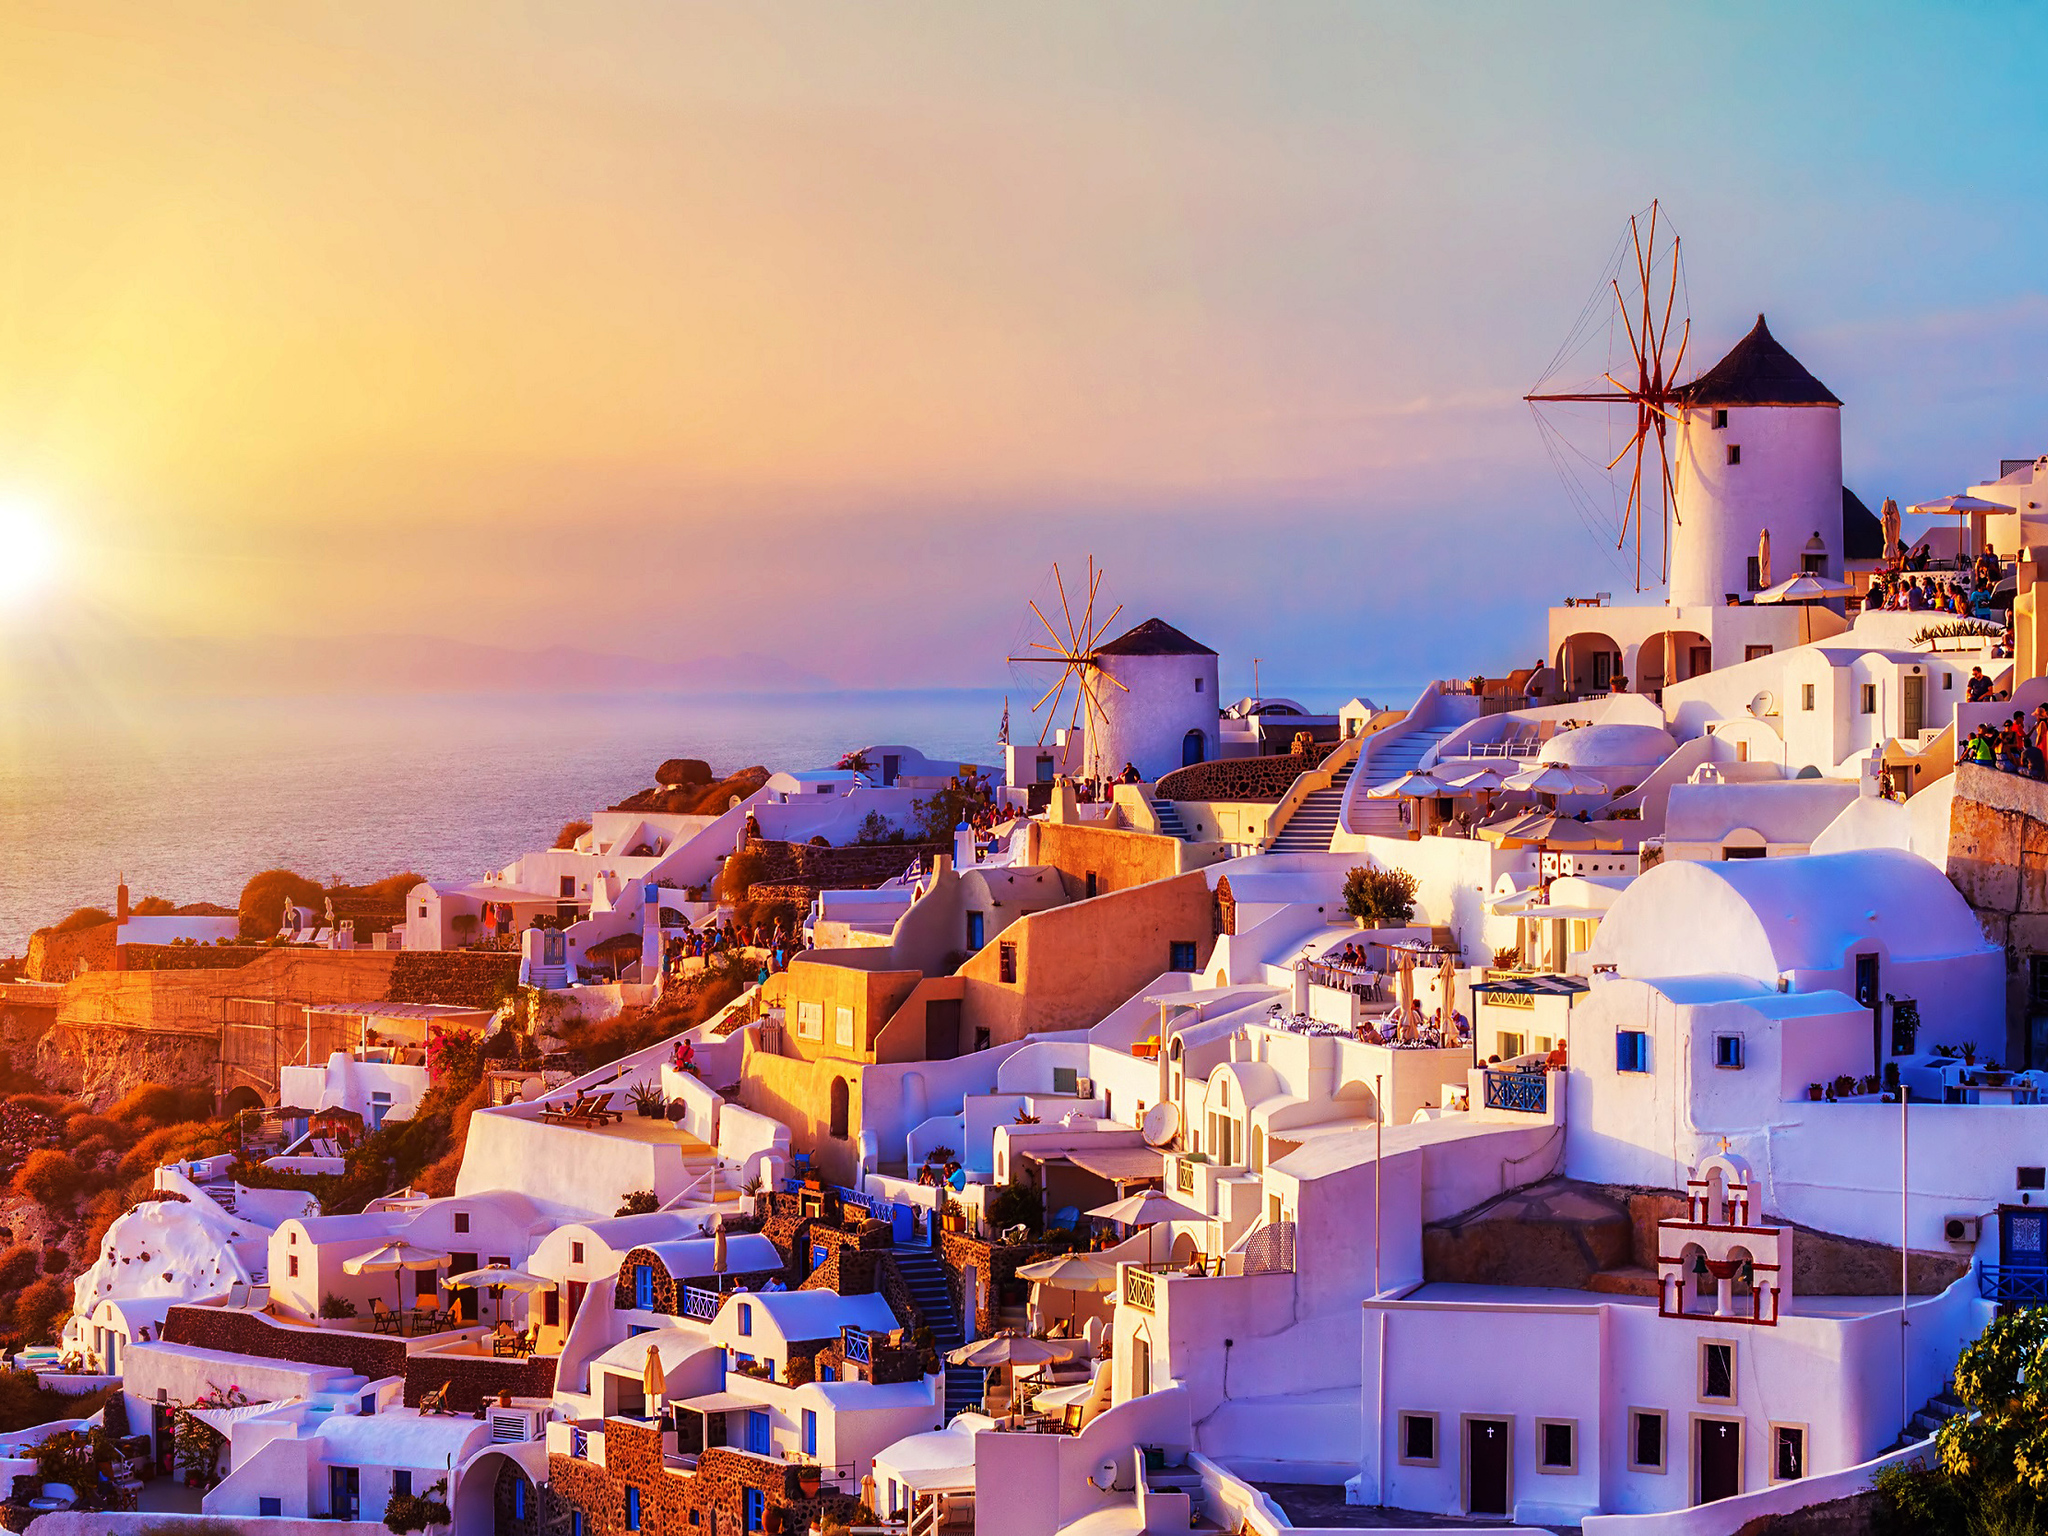 The spectacular sunset over the Oia village in Santorini